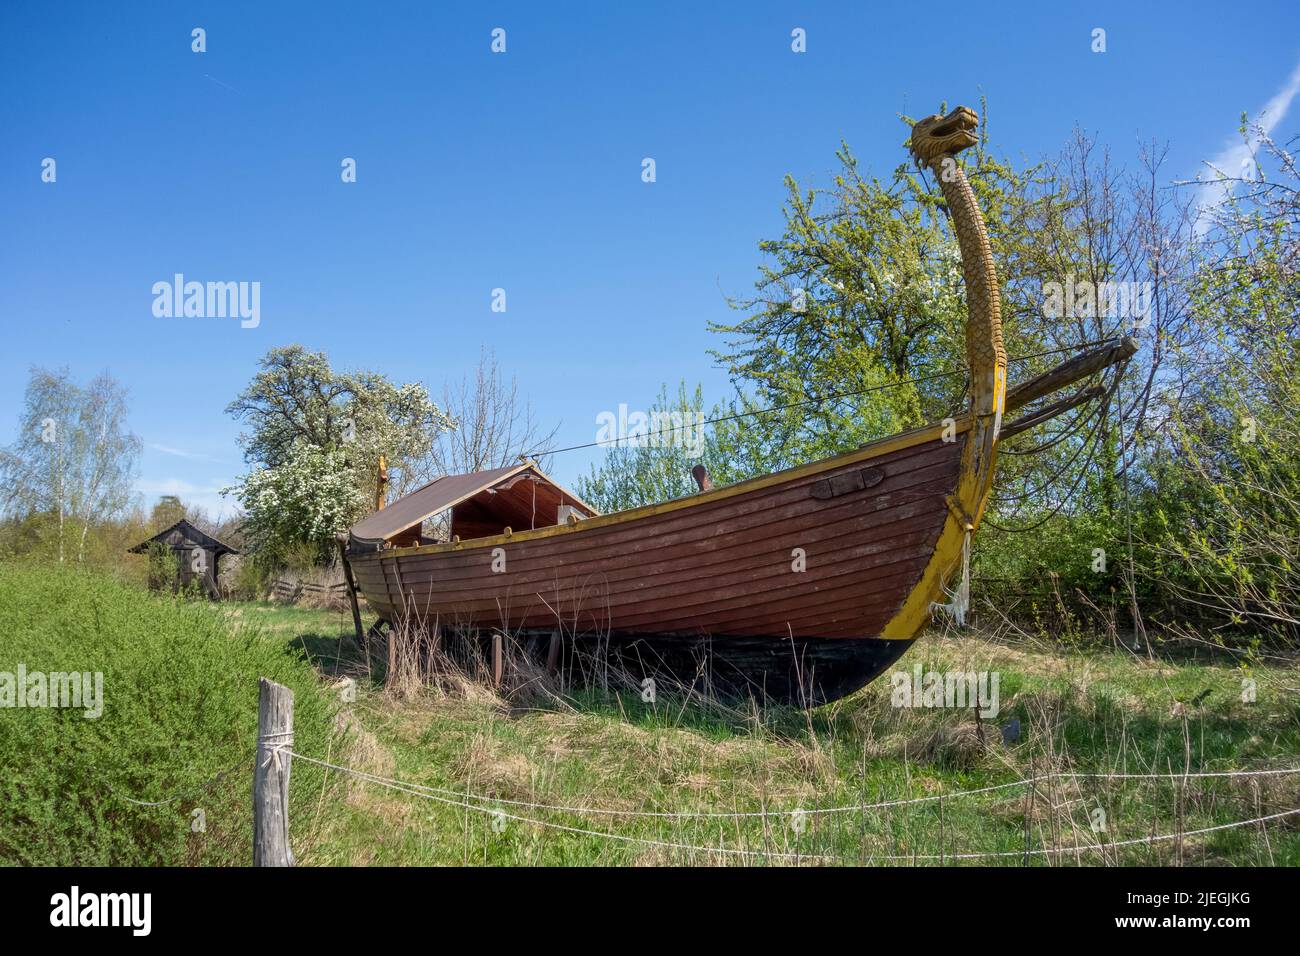 Medieval viking longboat in sunny ambiance at early spring time Stock Photo